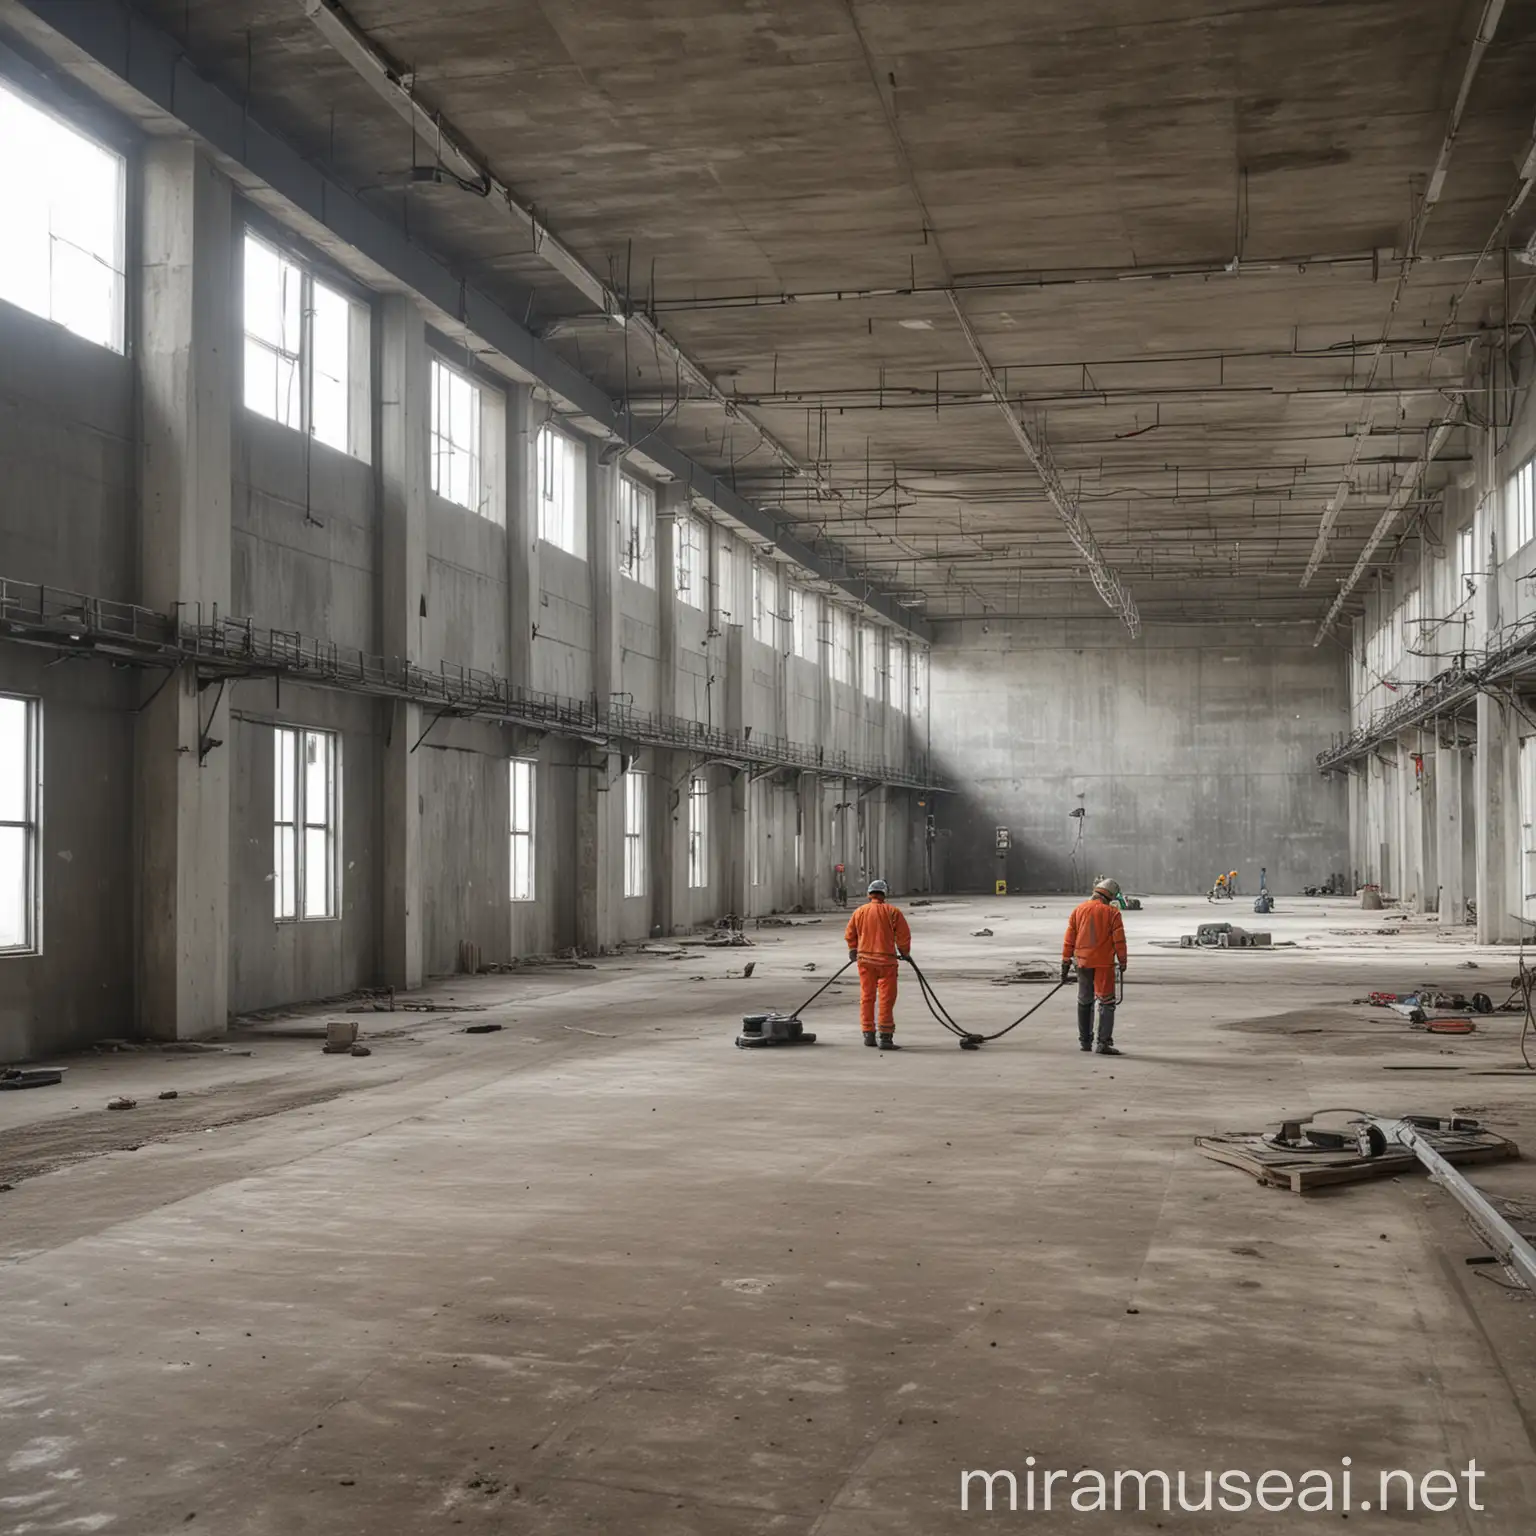 industrial construction site of 4 floors with visible worker vacuuming on each floor